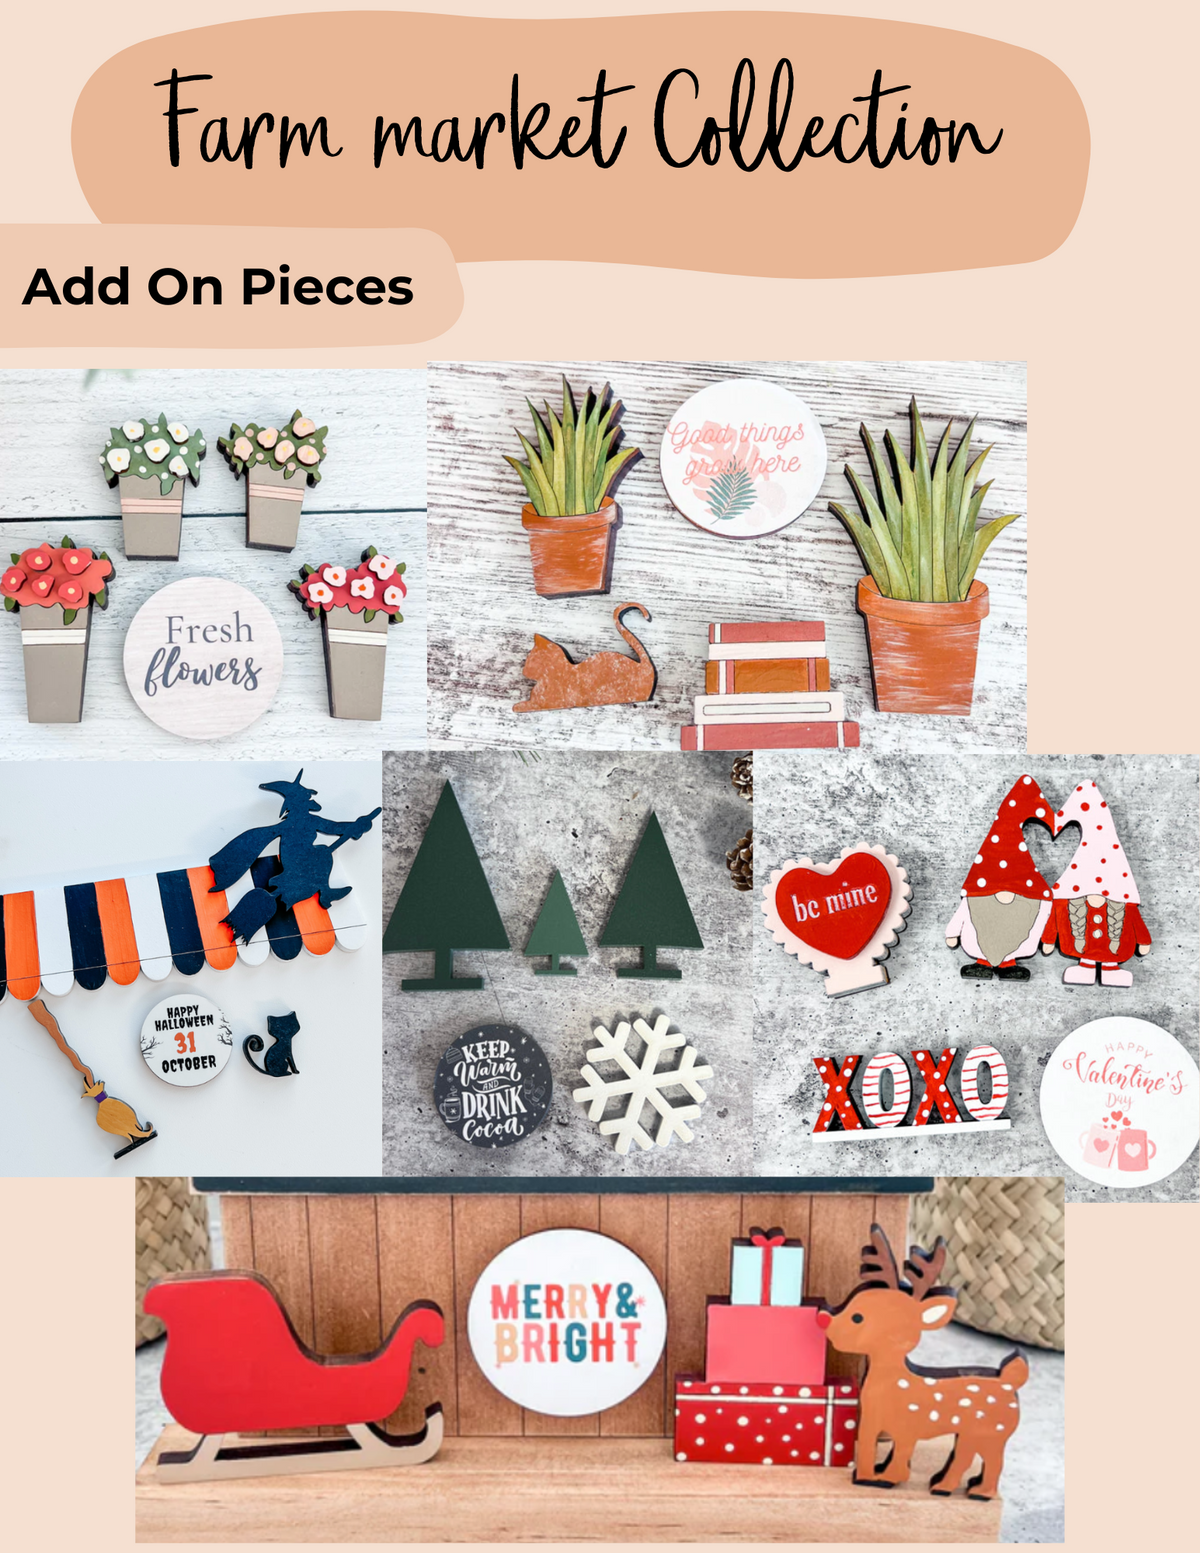 Add on Pieces | Farmers market Collection